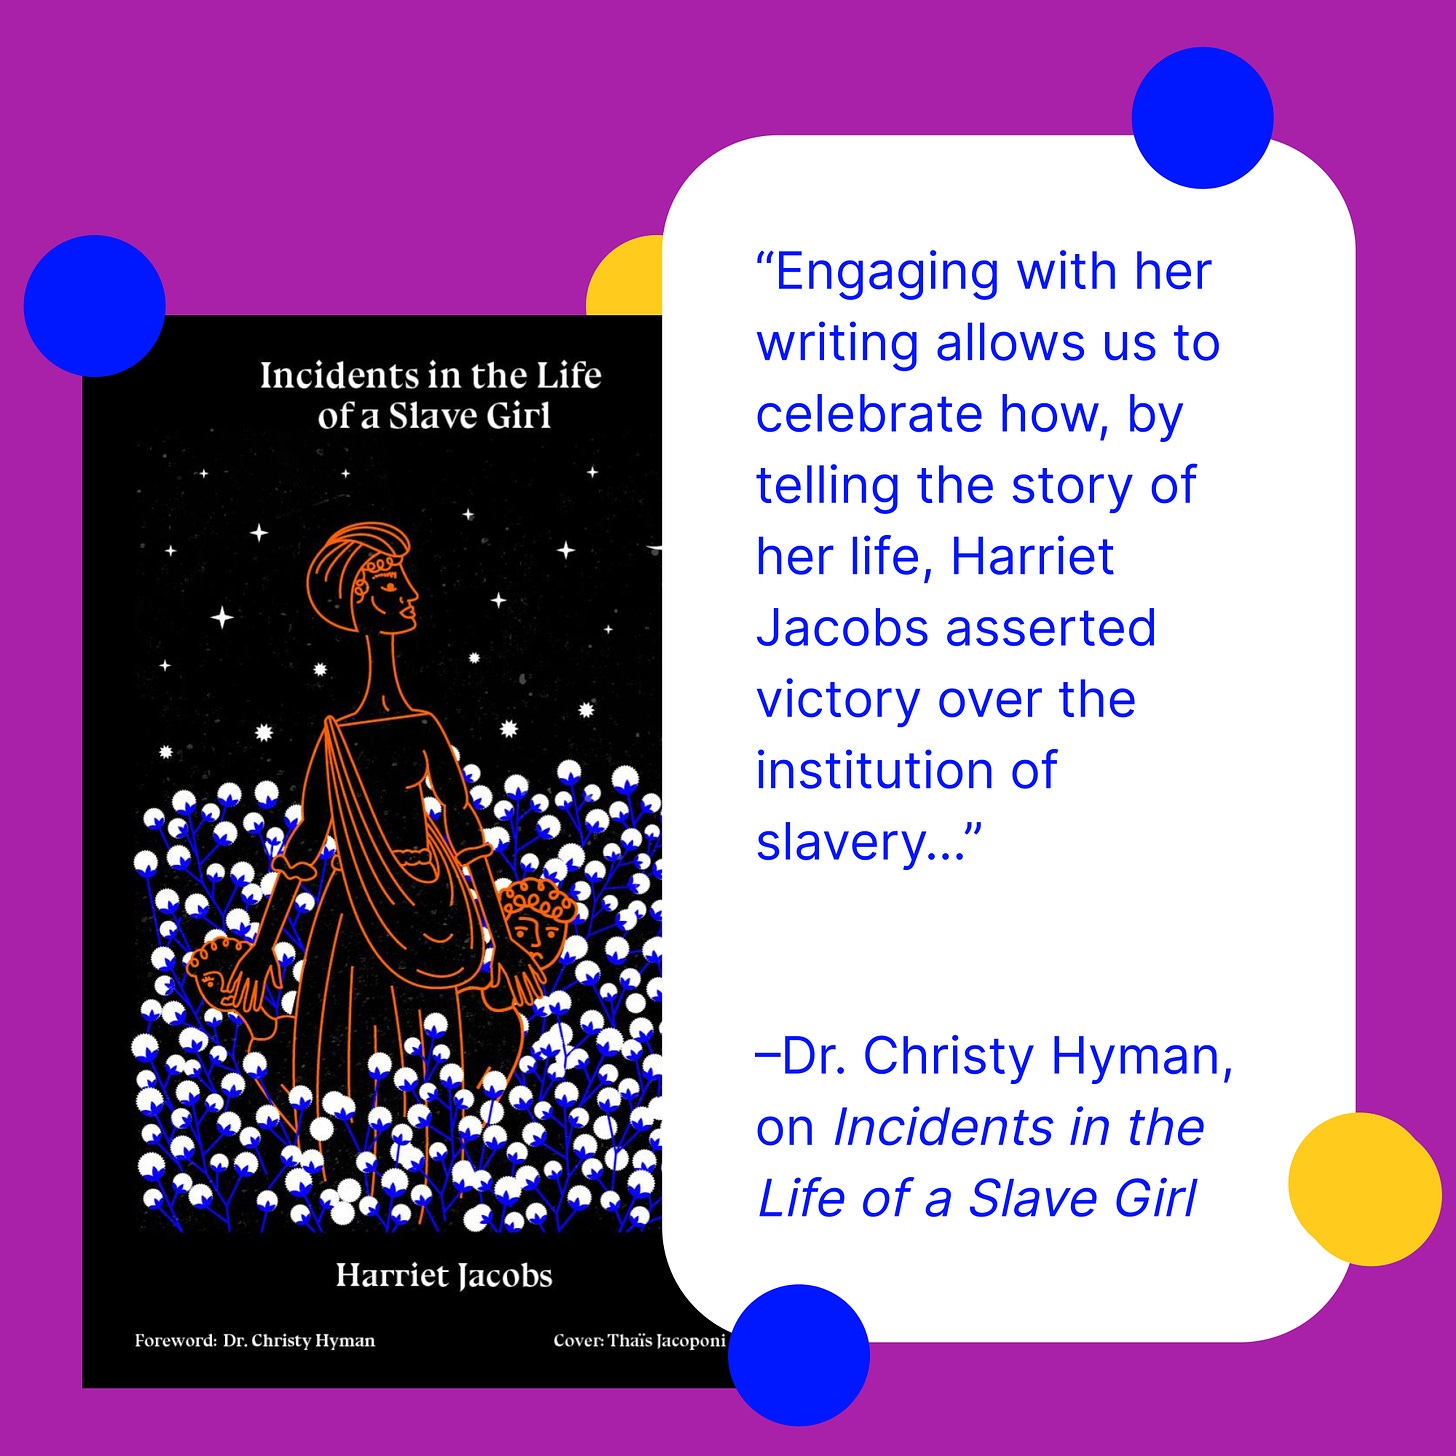 Image: The book cover for Incidents in the Life of a Slave Girl by Harriet Jacoobs. Text: “Engaging with her writing allows us to celebrate how, by telling the story of her life, Harriet Jacobs asserted victory over the institution of slavery…”   –Dr. Christy Hyman, on Incidents in the Life of a Slave Girl